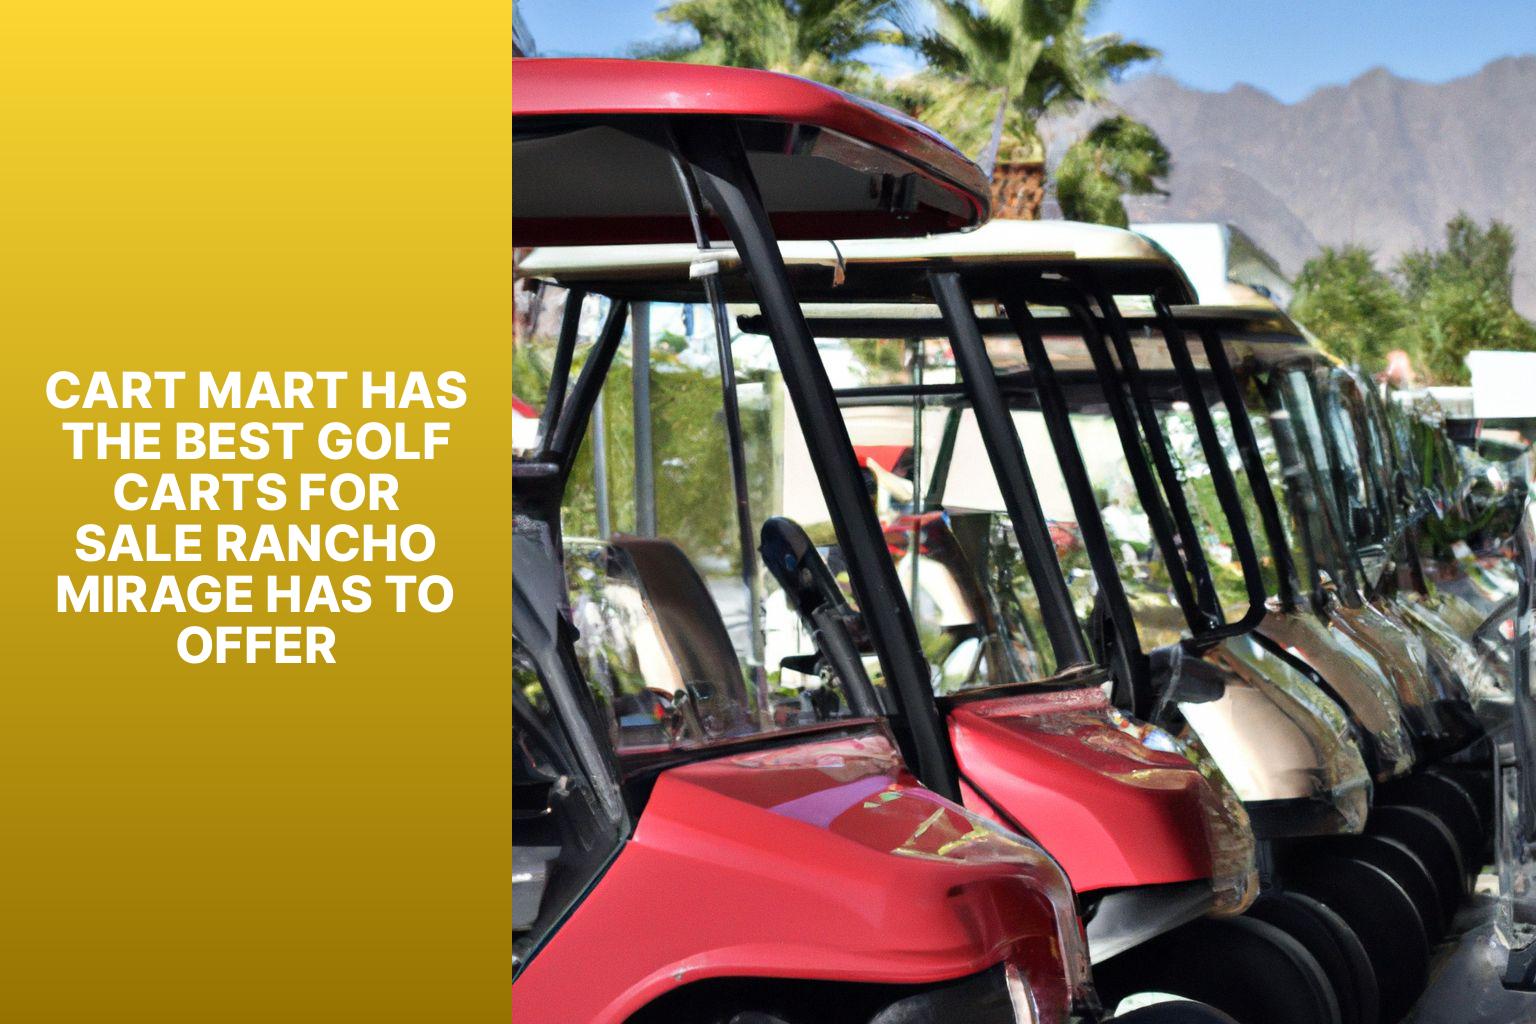 Cart Mart has the Best Golf carts for sale Rancho Mirage has to offer